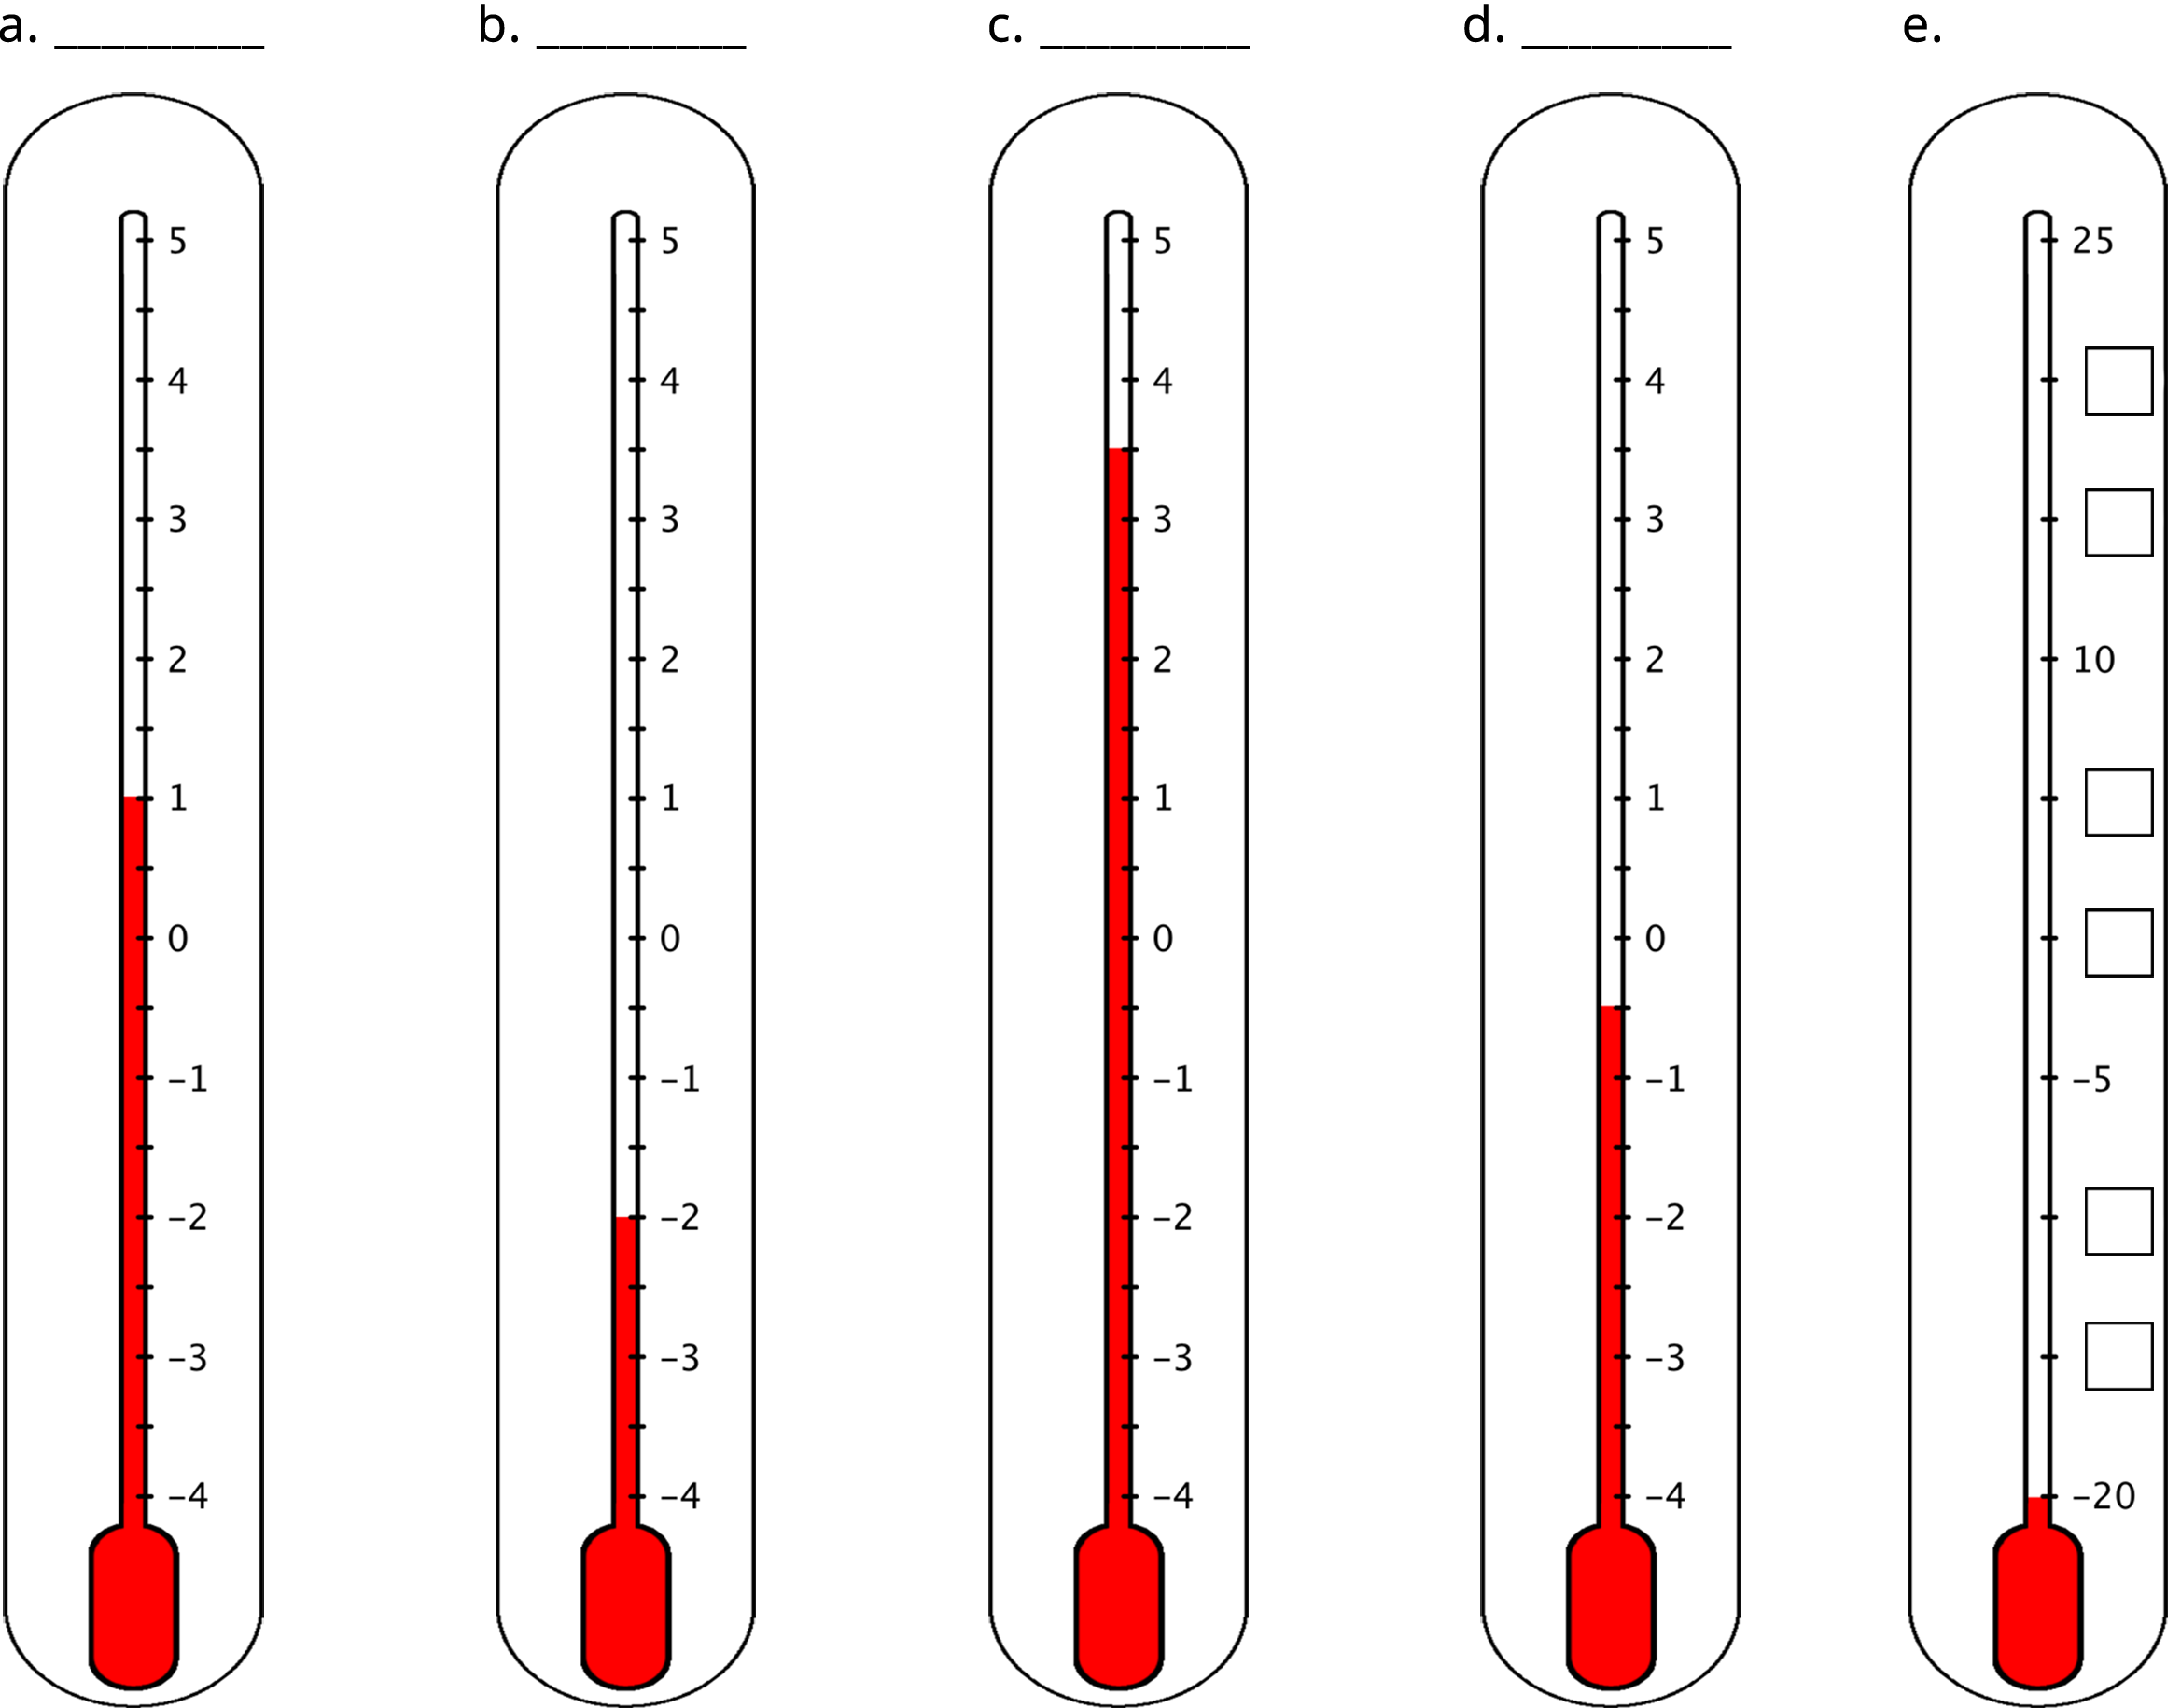 Five vertical thermometers are labeled a, b, c, d, and e.  Thermometer a has the numbers negative 4 to 5 indicated. The number 4 is on the bottom and 5 is on the top. The thermometer is shaded from the bottom of the thermometer to 1. Thermometer b has the numbers negative 4 to 5 indictaed. The number 4 is on the bottom and 5 is on the top. The thermometer is shaded from the bottom of the thermometer to negative 2.  Thermometer c has the numbers negative 4 to 5 indicated. The number 4 is on the bottom and 5 is on the top. The thermometer is shaded from the bottom of the thermometer to halfway between 3 and 4.  Thermometer d has the numbers negative 4 to 5 indicated. The number 4 is on the bottom and 5 is on the top. The thermometer is shaded from the bottom of the thermometer to halfway between negative 1 and zero.  Thermometer e has the numbers negative 20, negative 5, 10, and 25 indicated. There are 2 evenly spaced tick marks with missing labels between negative 20 and negative 5, between negative 5 and 10, and between 10 and 25. The thermometer is shaded from the bottom of the thermometer to negative 20.